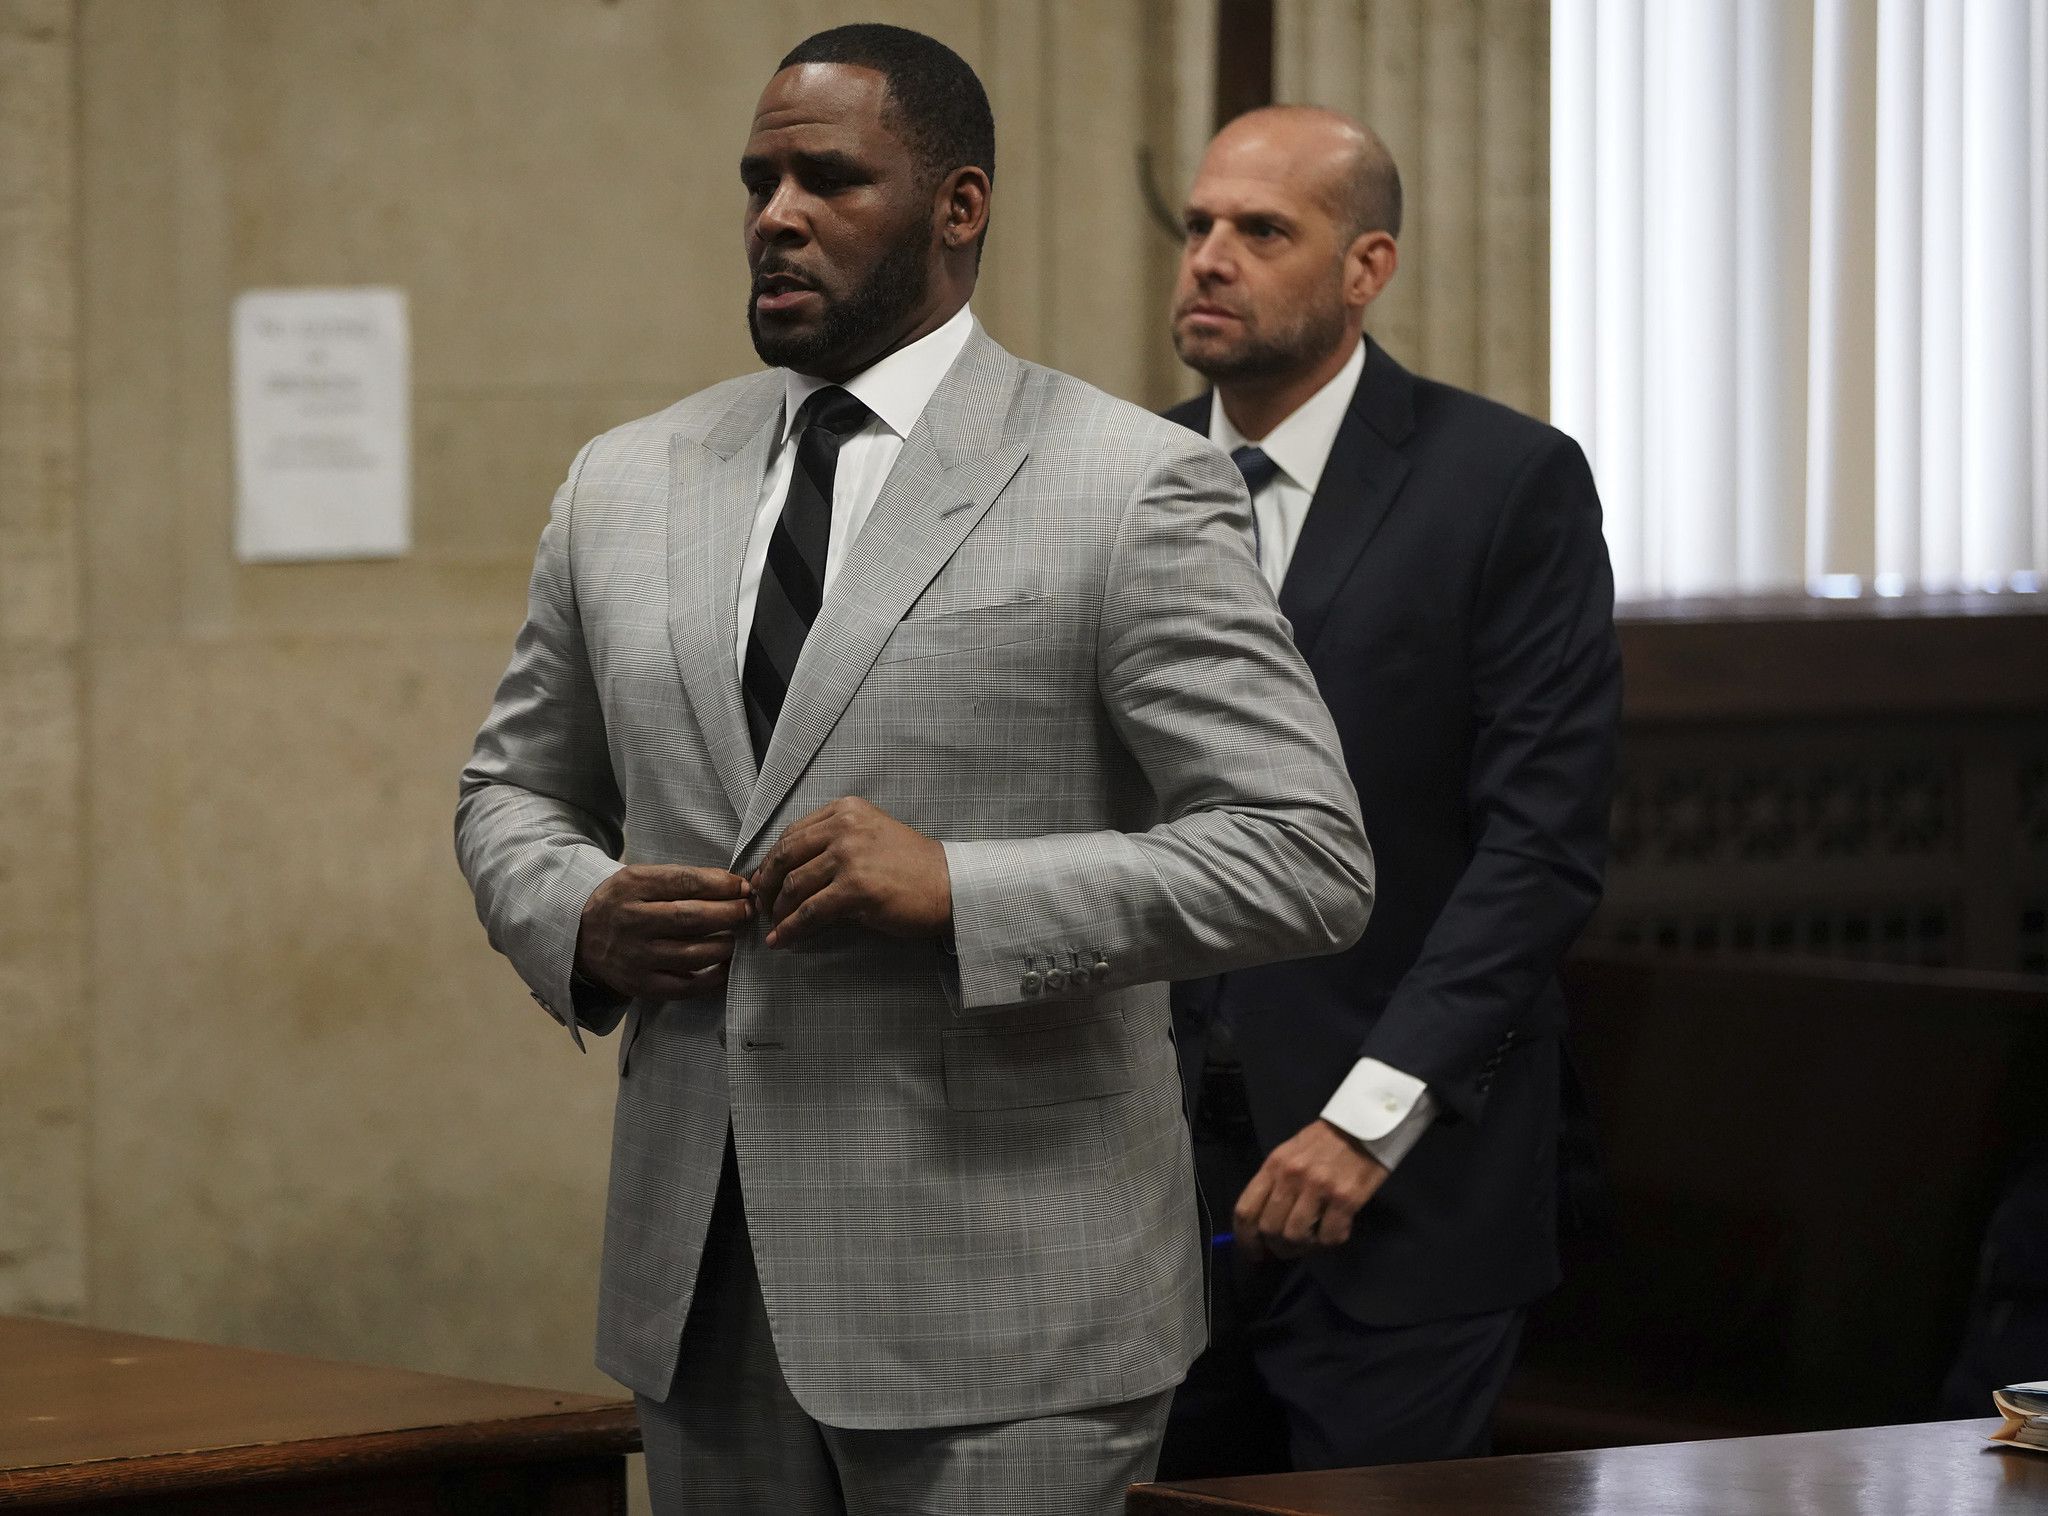 R. Kelly buttons up his suit jacket in court; Kelly is ordered to pay restitution to his victims